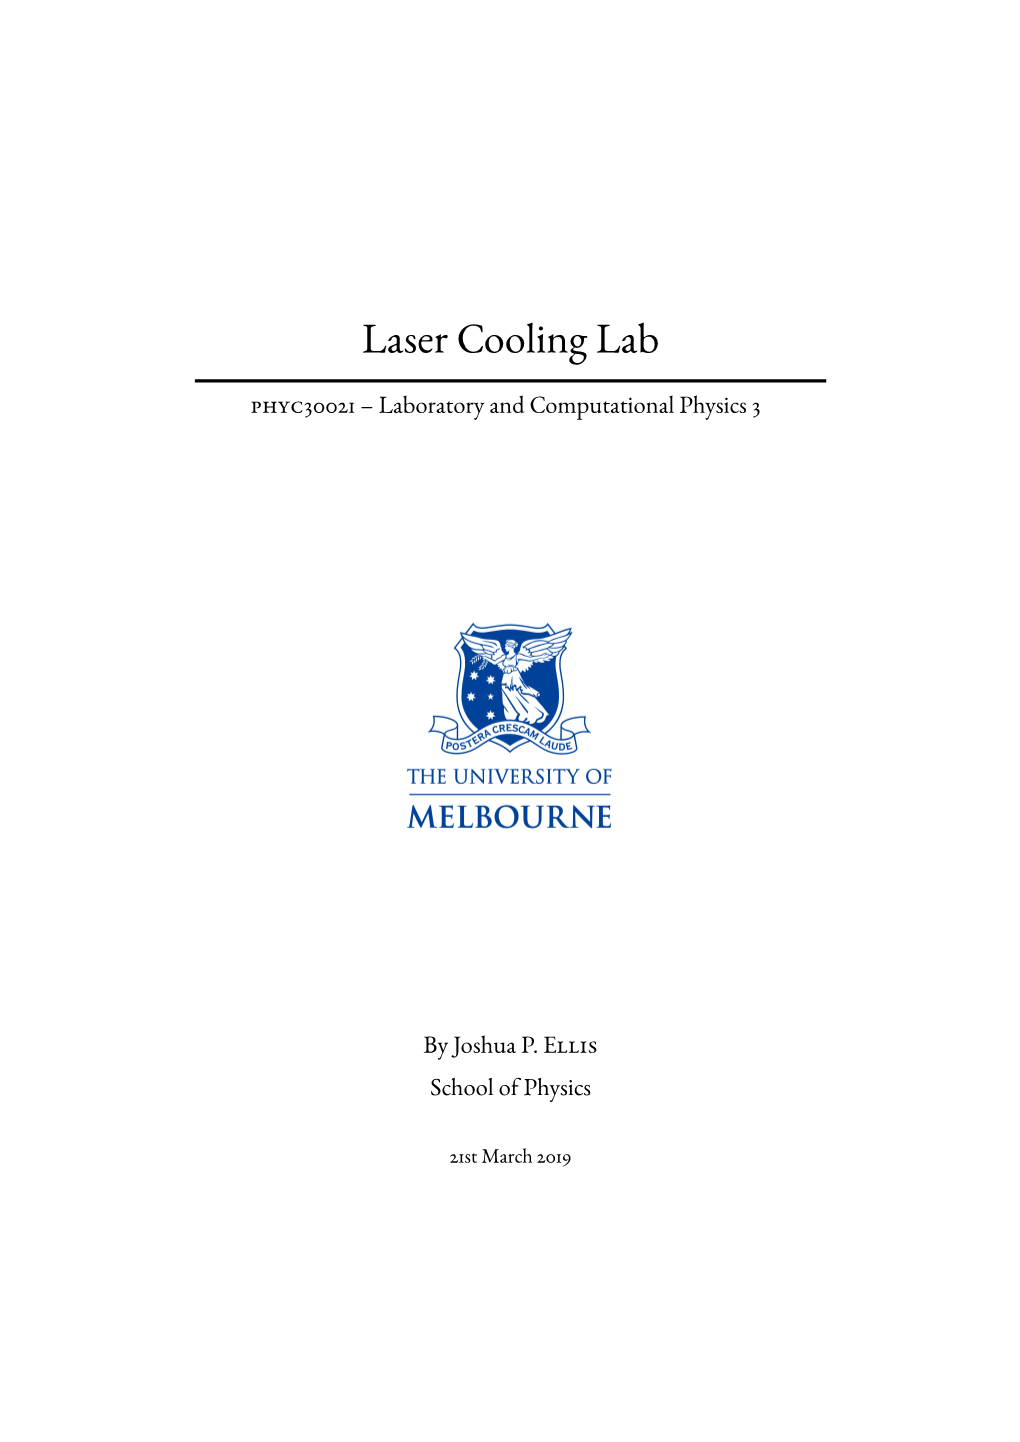 Laser Cooling Lab Phyc30021 – Laboratory and Computational Physics 3